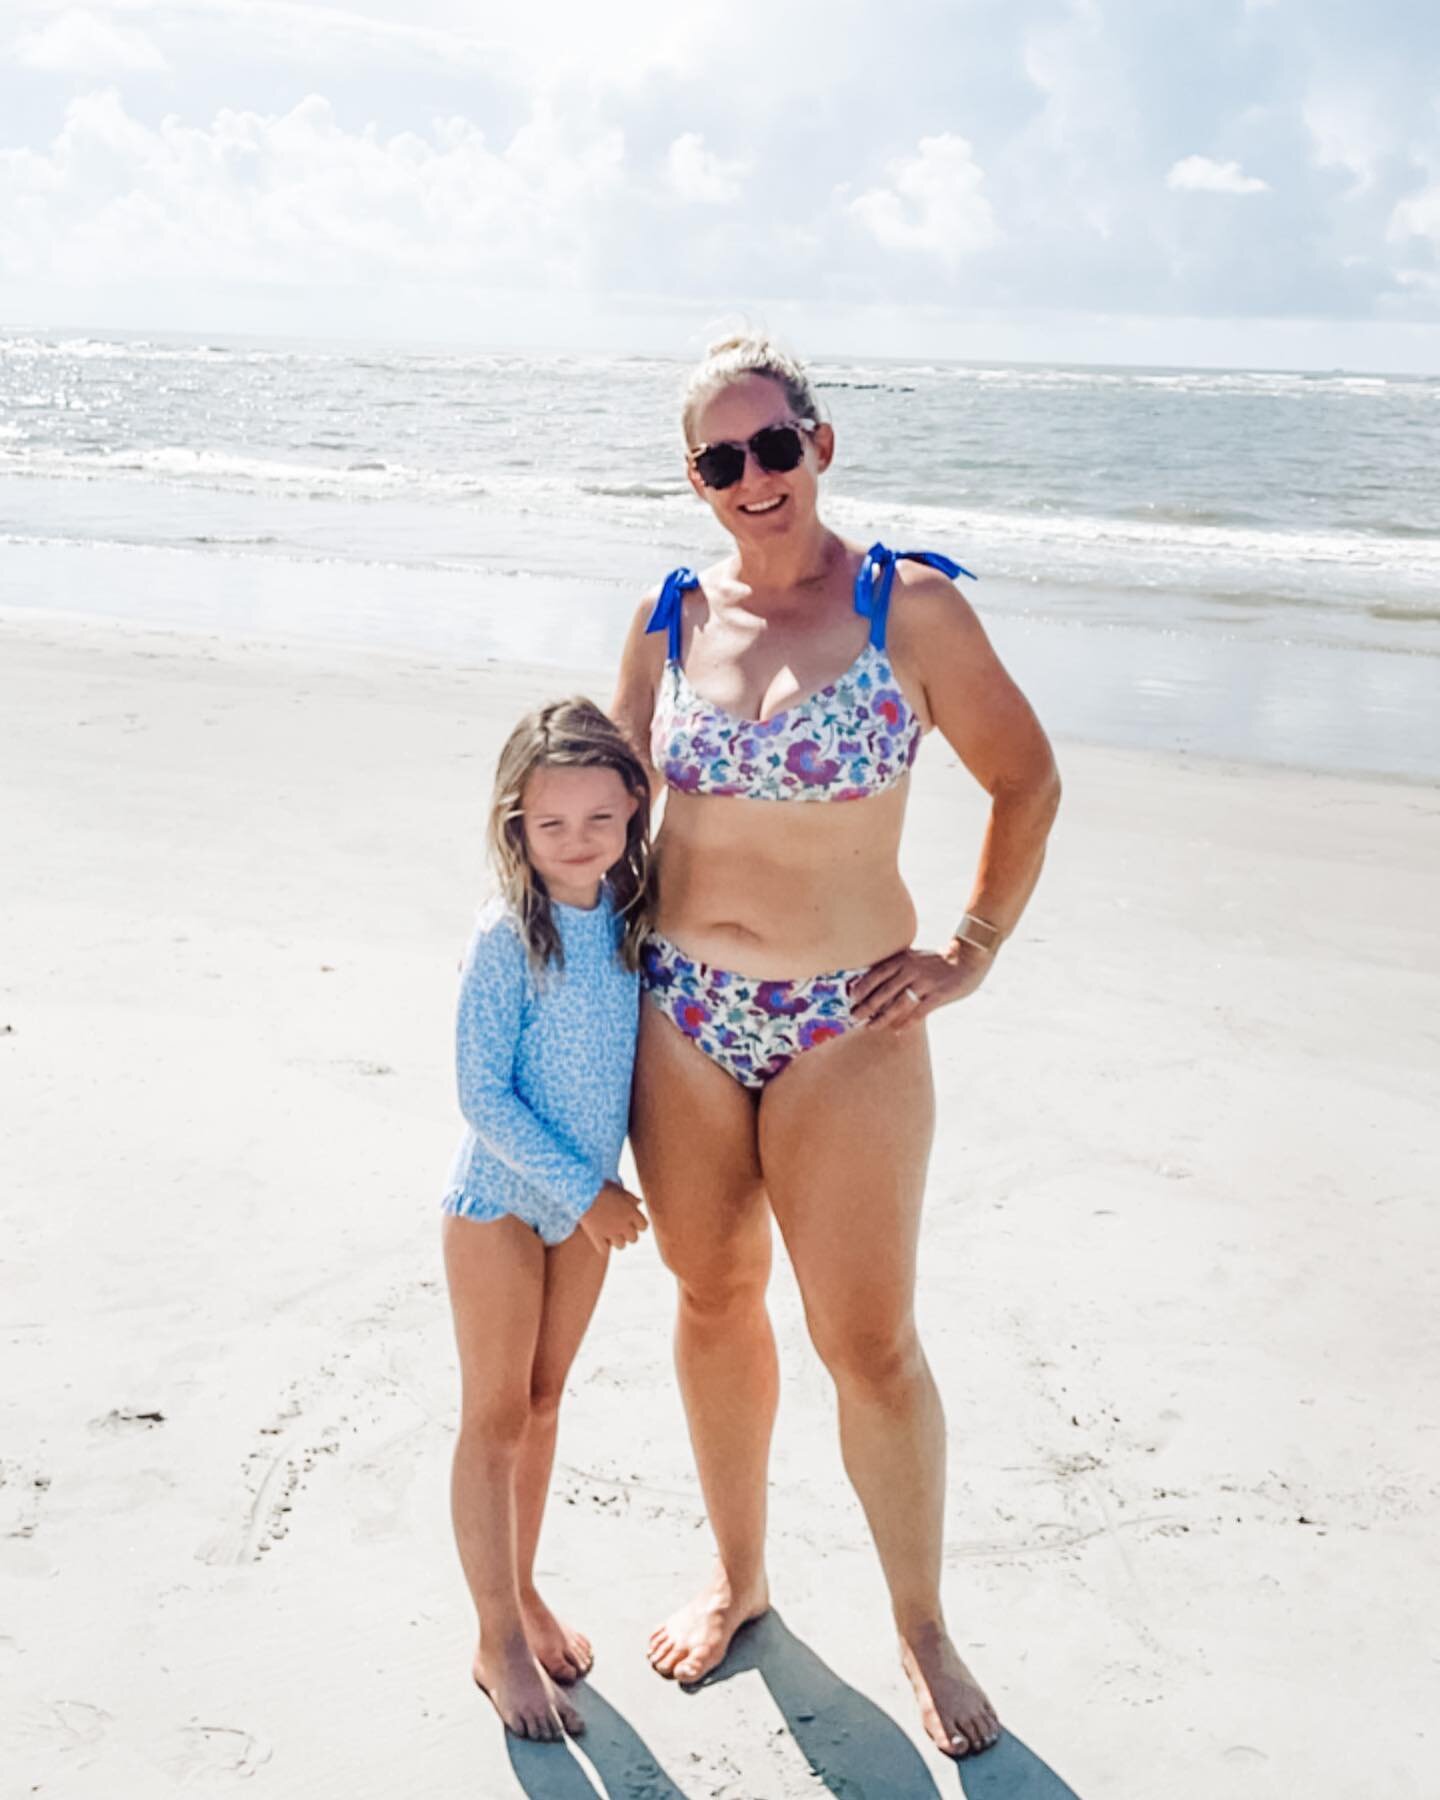 Rock the bikini 👙 

I can&rsquo;t think of any time in my life where I would have been comfortable posting this picture. I am 42, a mom of multiple children, and strong AF. 

There is NO perfect body. I am done &ldquo;waiting&rdquo; for the perfect 